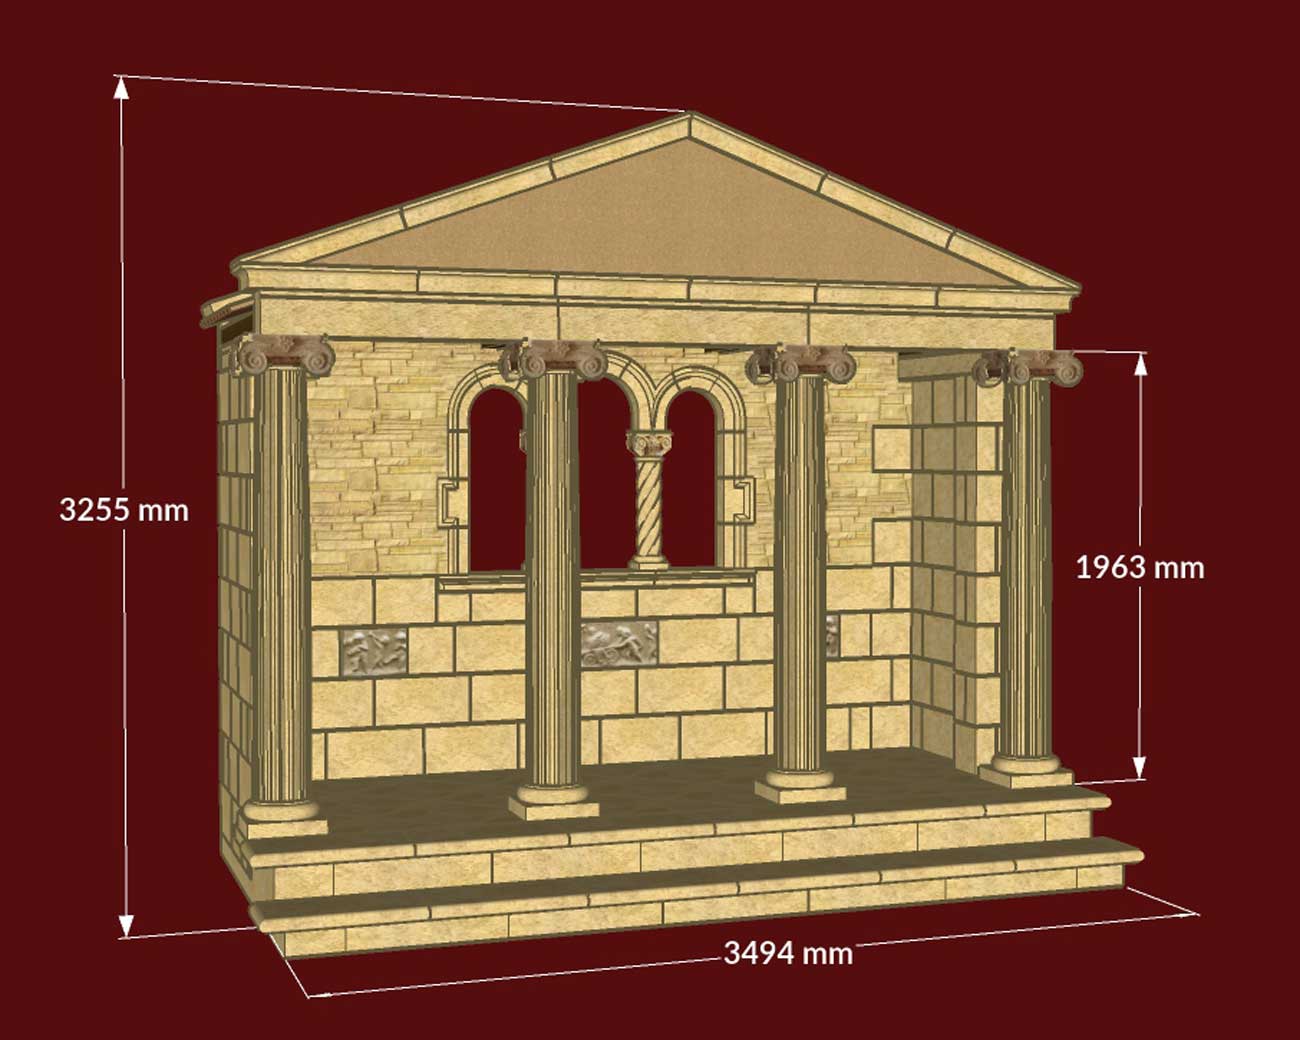 The Tuscan Temple 3D Drawing